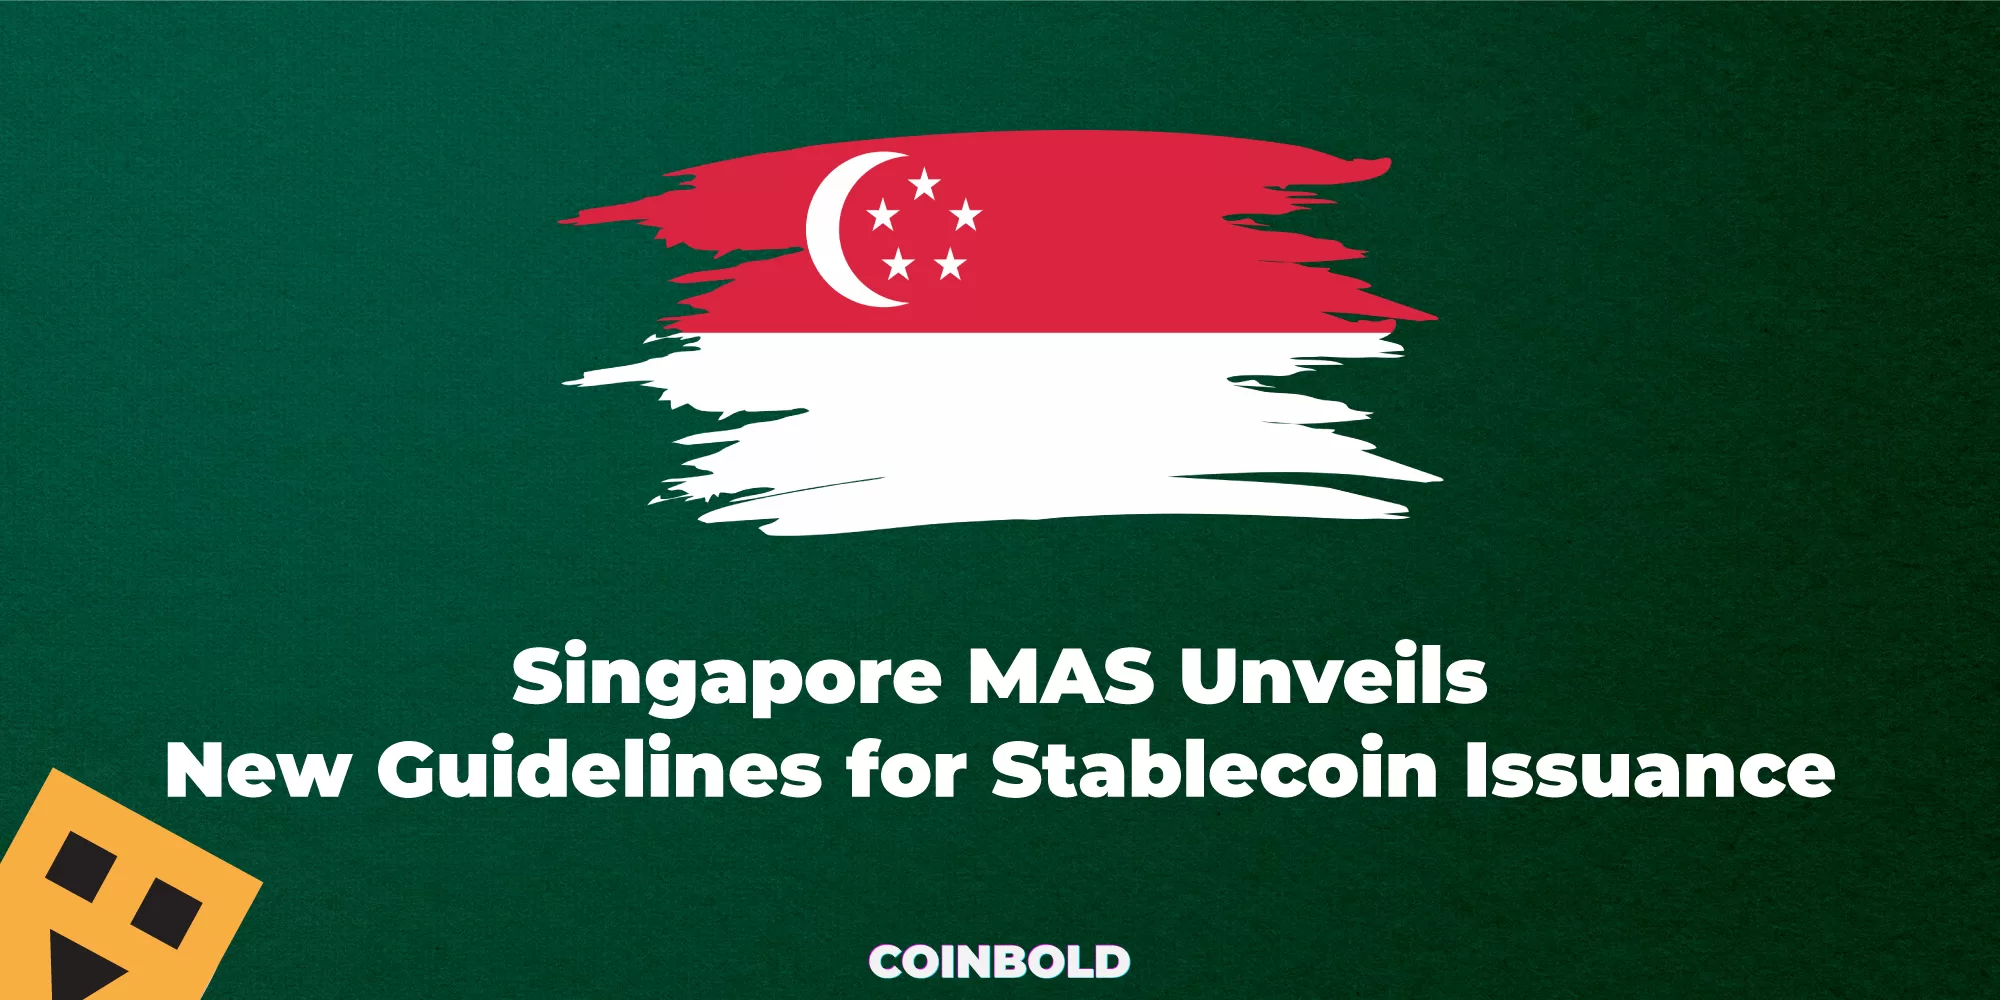 Singapore MAS Unveils New Guidelines for Stablecoin Issuance